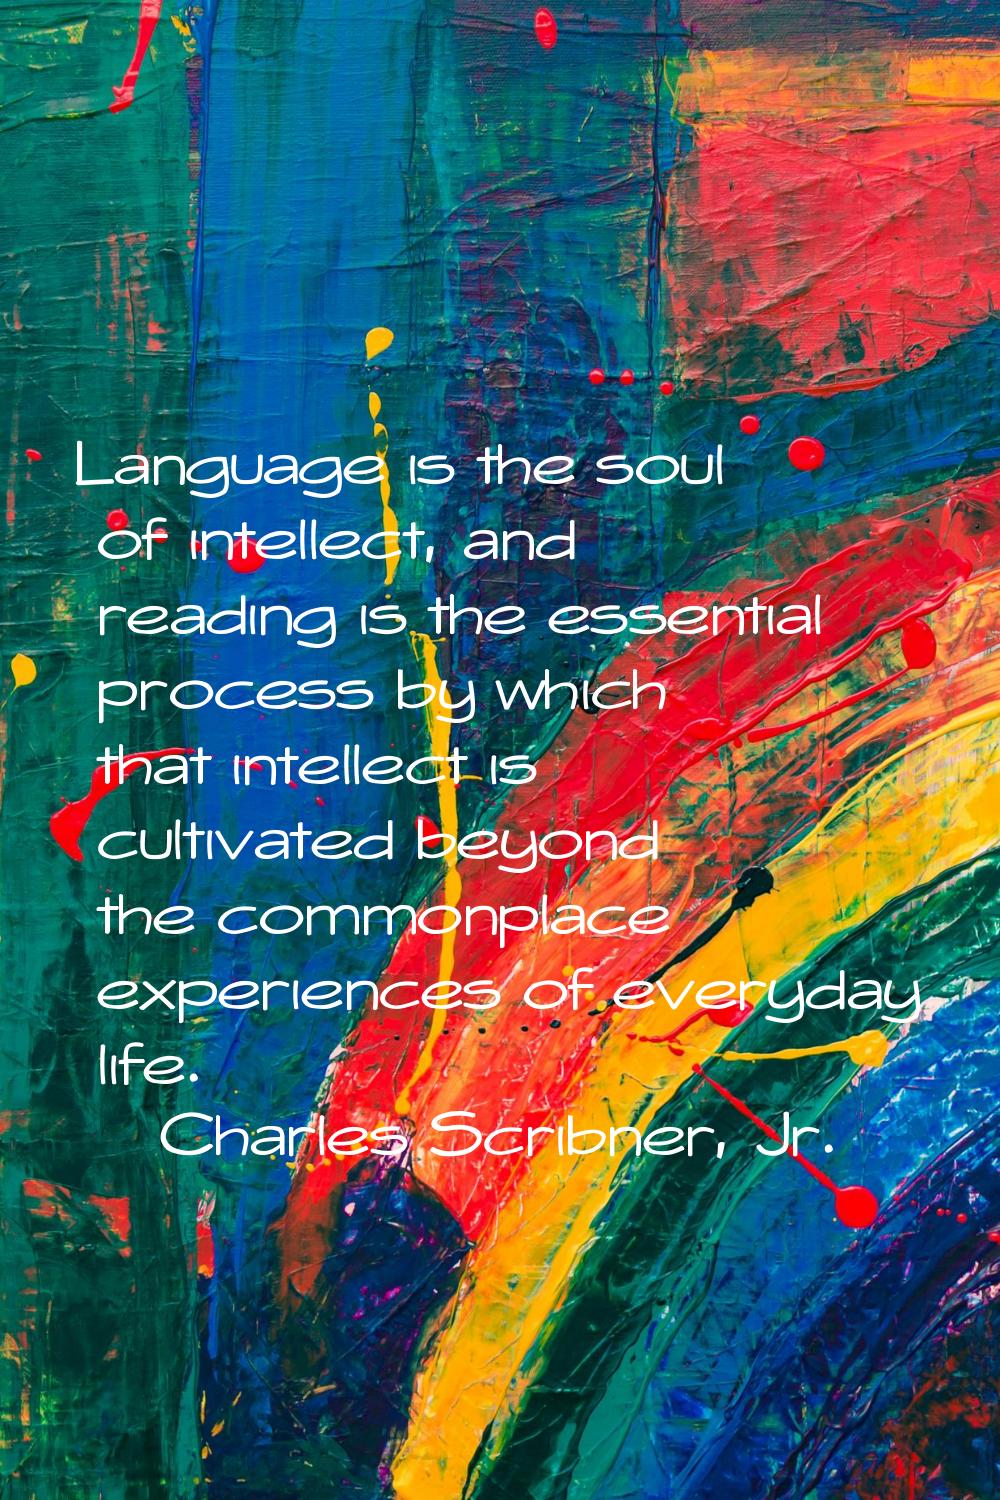 Language is the soul of intellect, and reading is the essential process by which that intellect is 